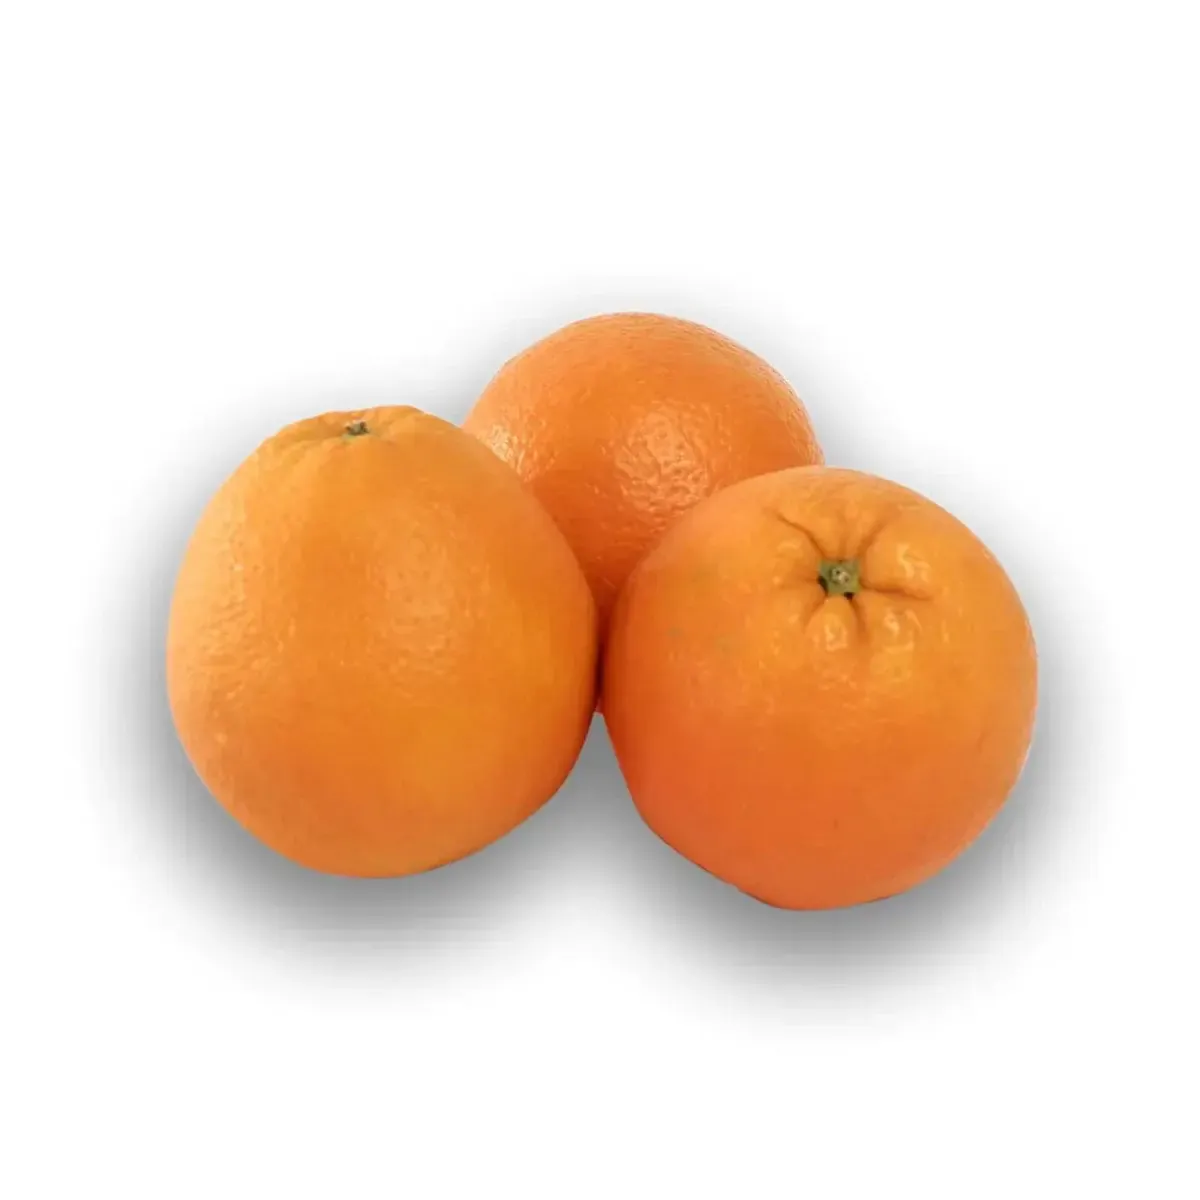 Purchase and price of orange fruit benefits types